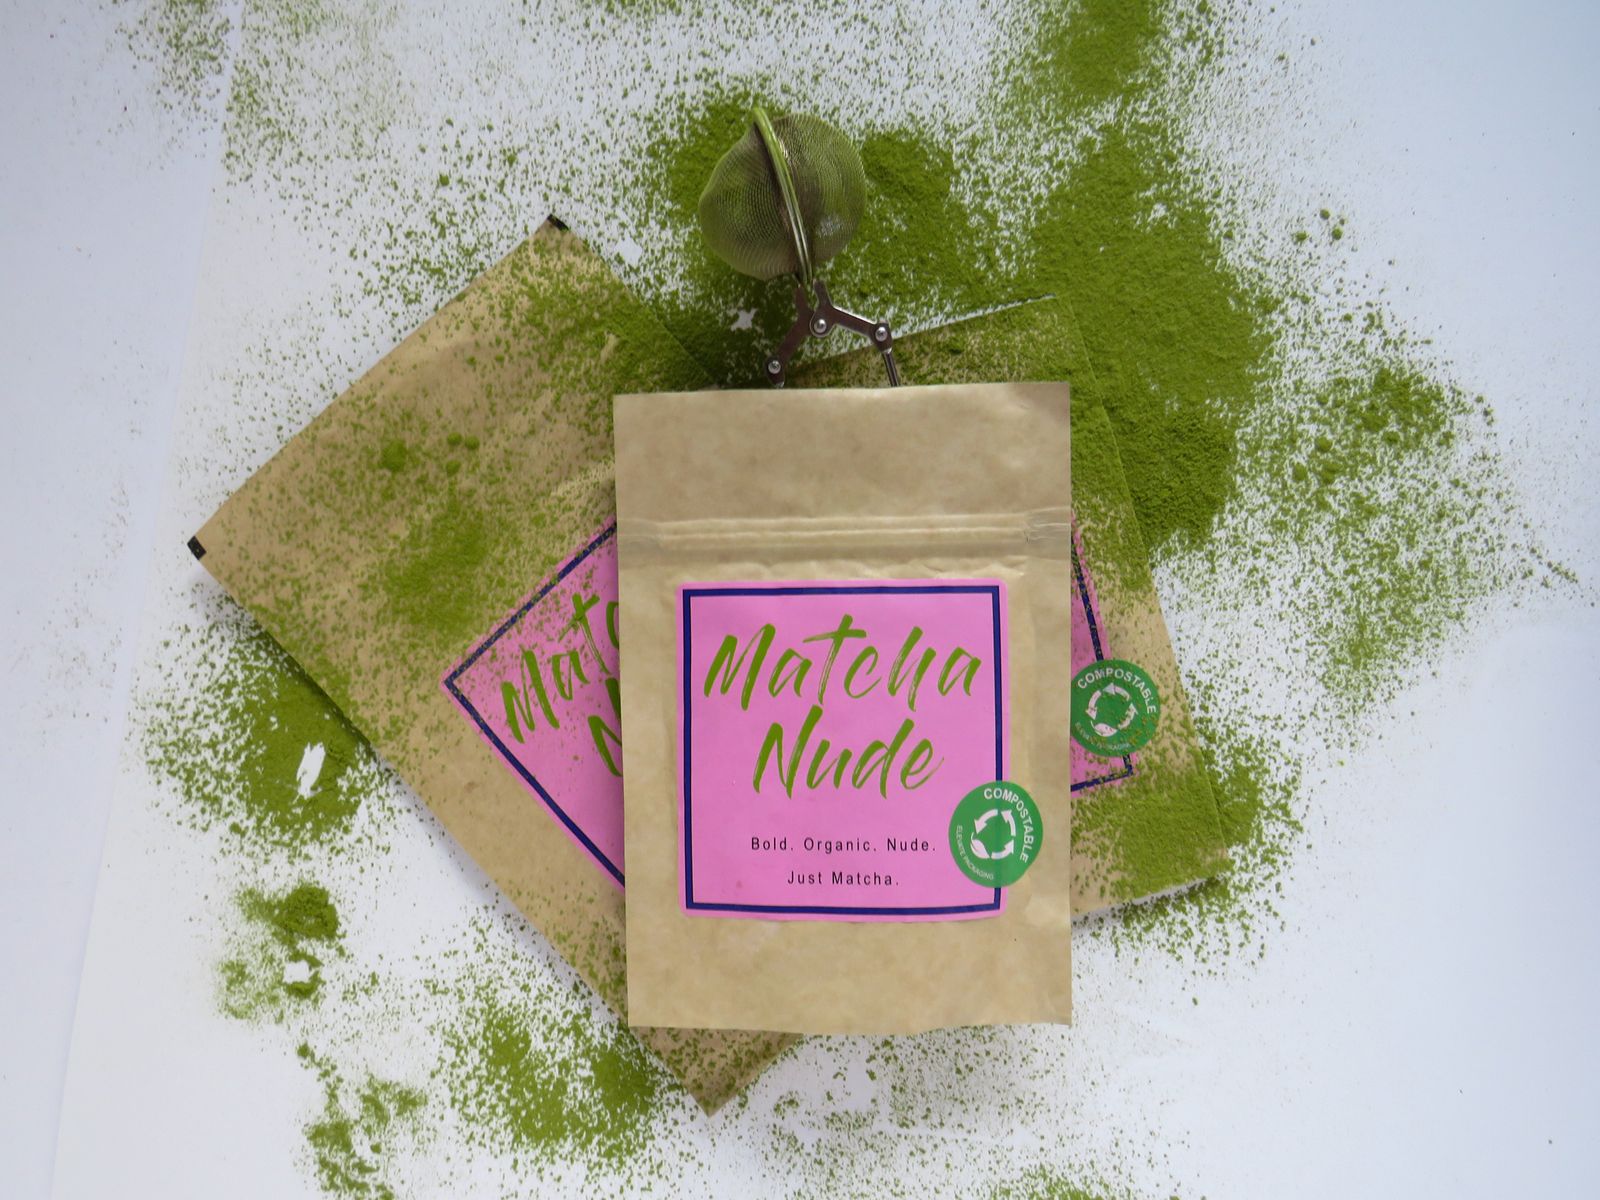 Matcha Nude: The Everyday Matcha for a Busy Lifestyle